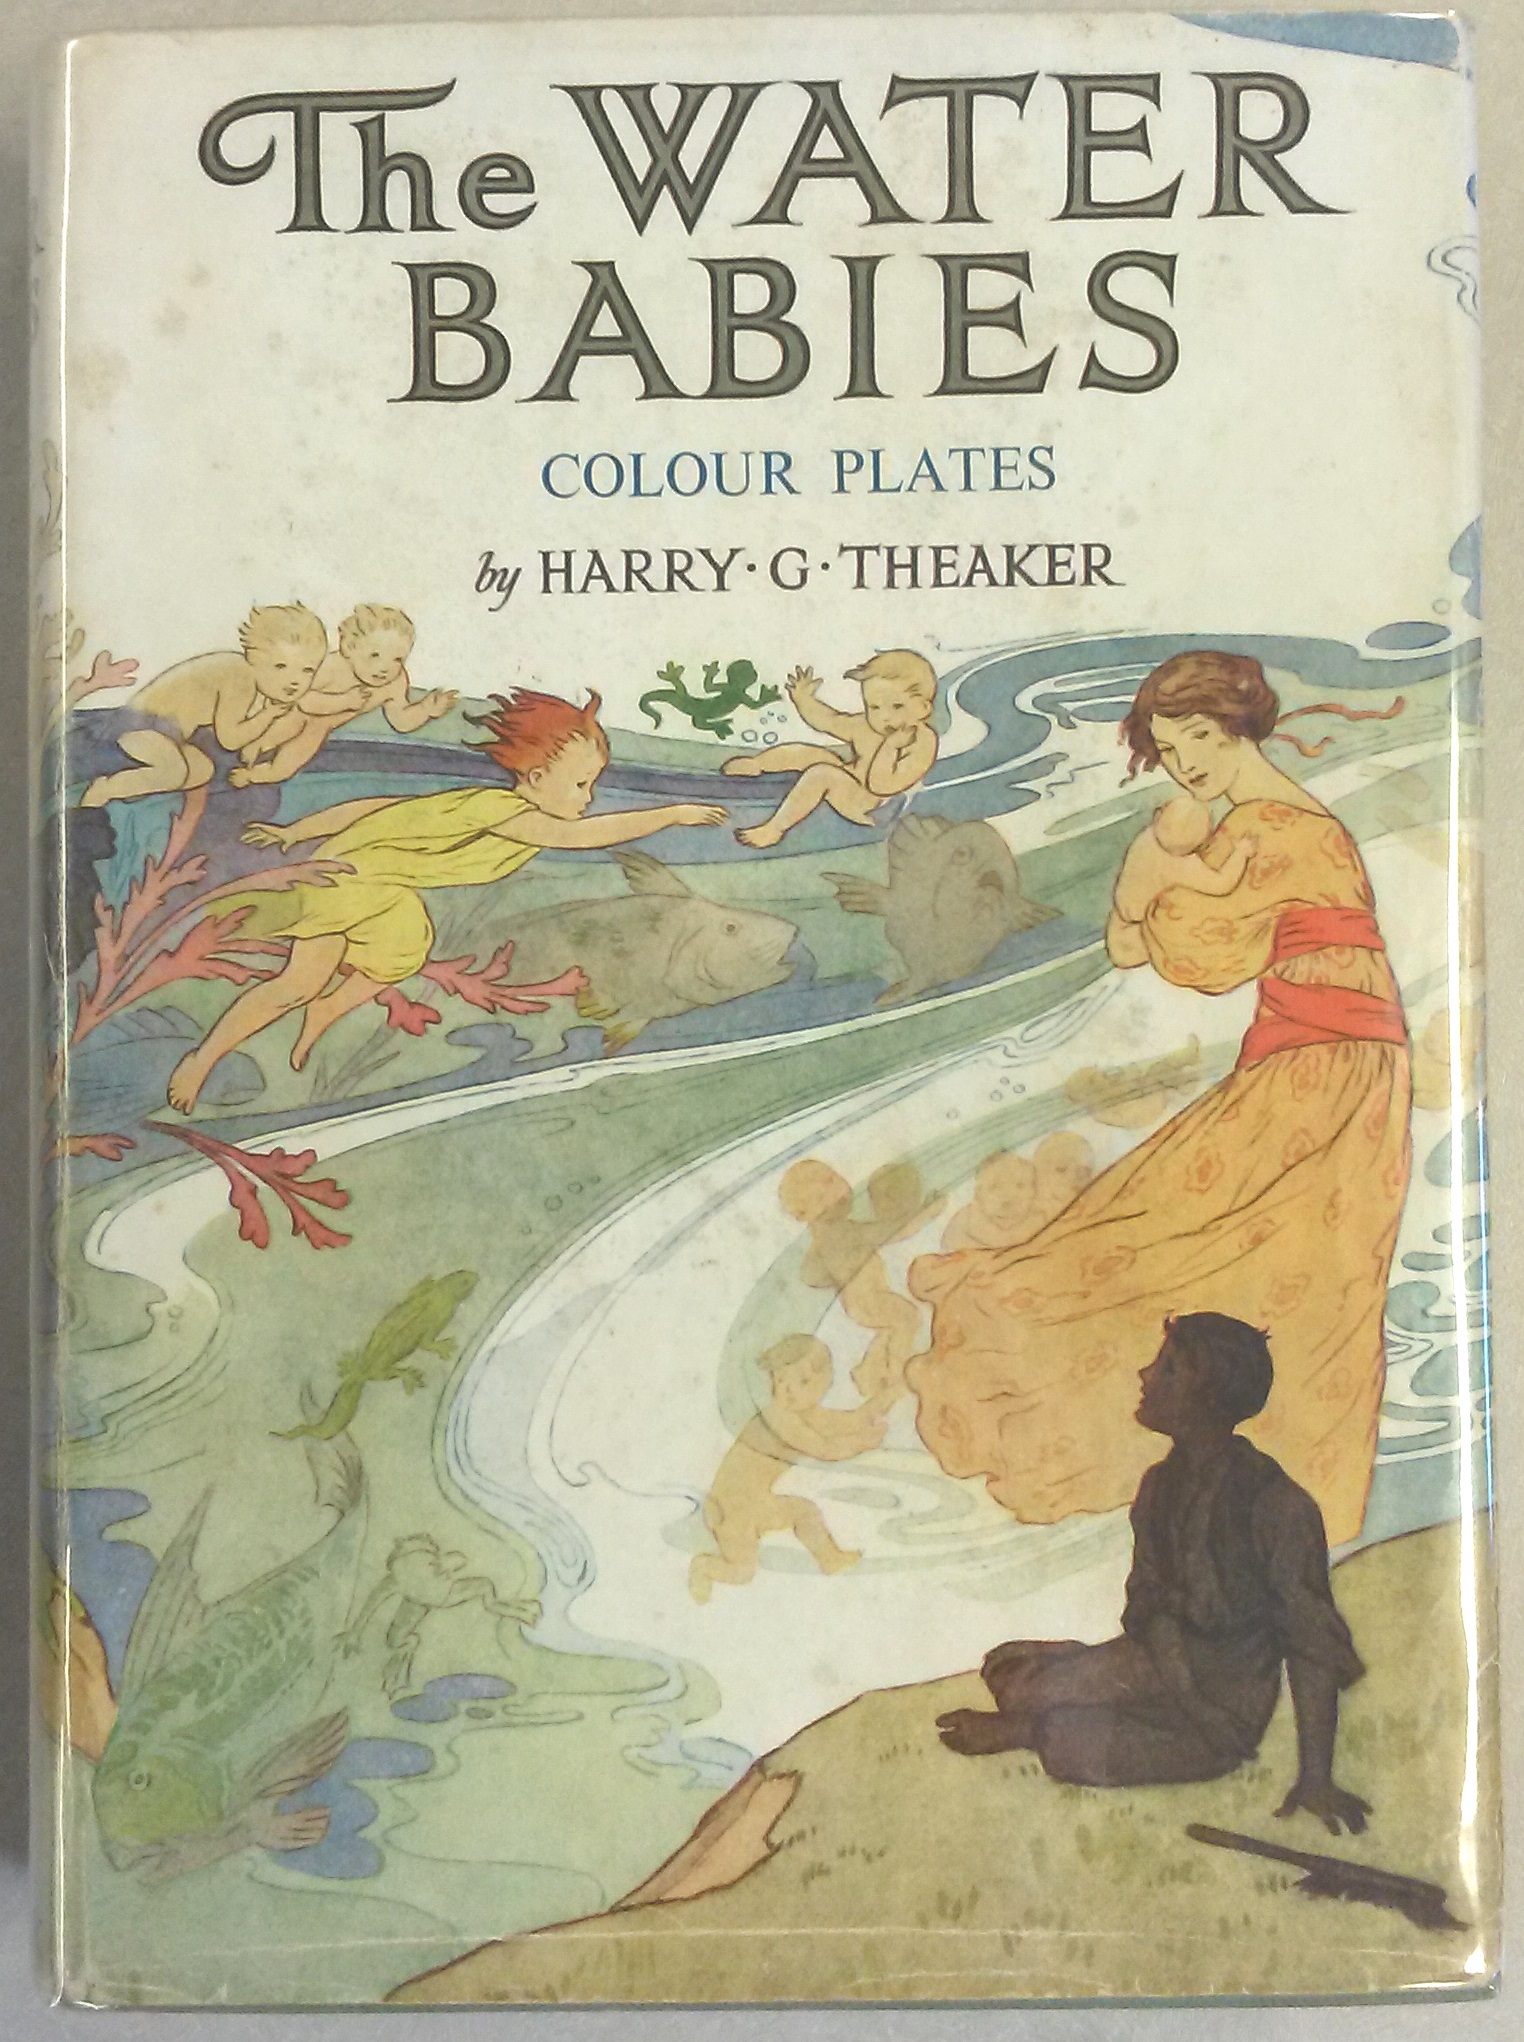 Cover image of fairies and water babies on the beach